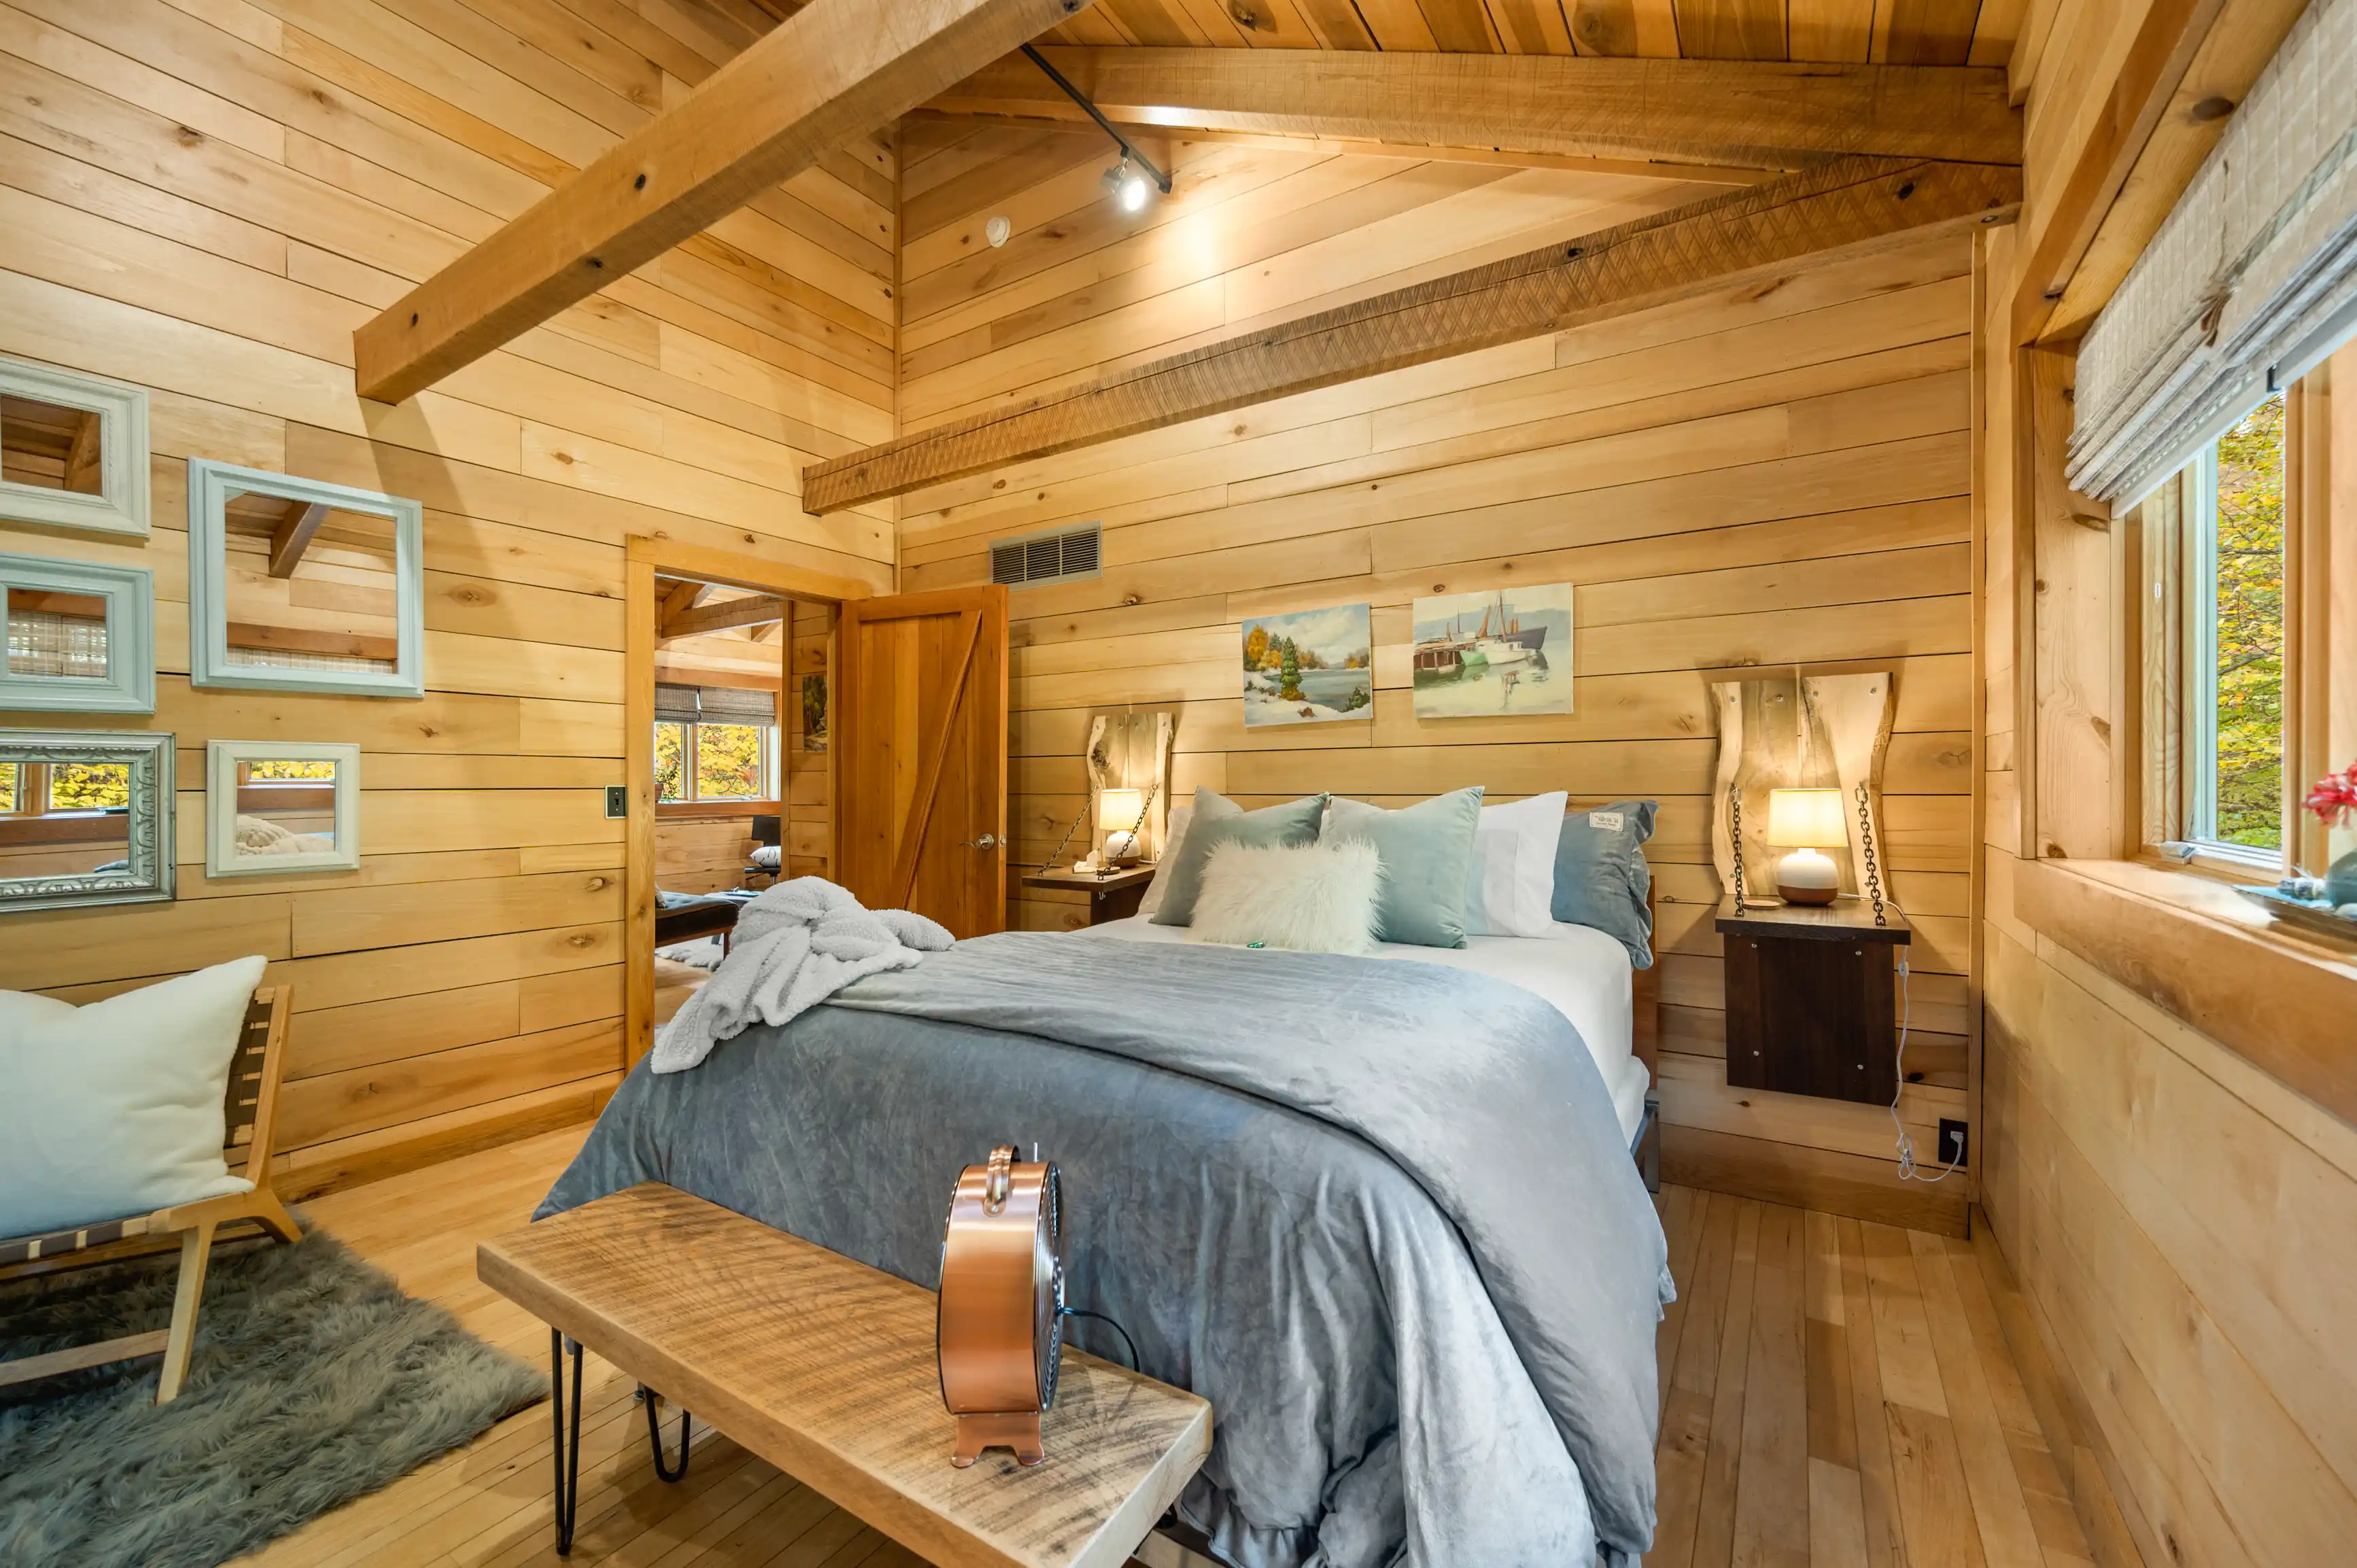 Cozy wooden cabin bedroom interior with a made-up bed, fluffy pillows, hanging artwork, and a warm blanket draped over the corner, with natural light streaming in through the windows.